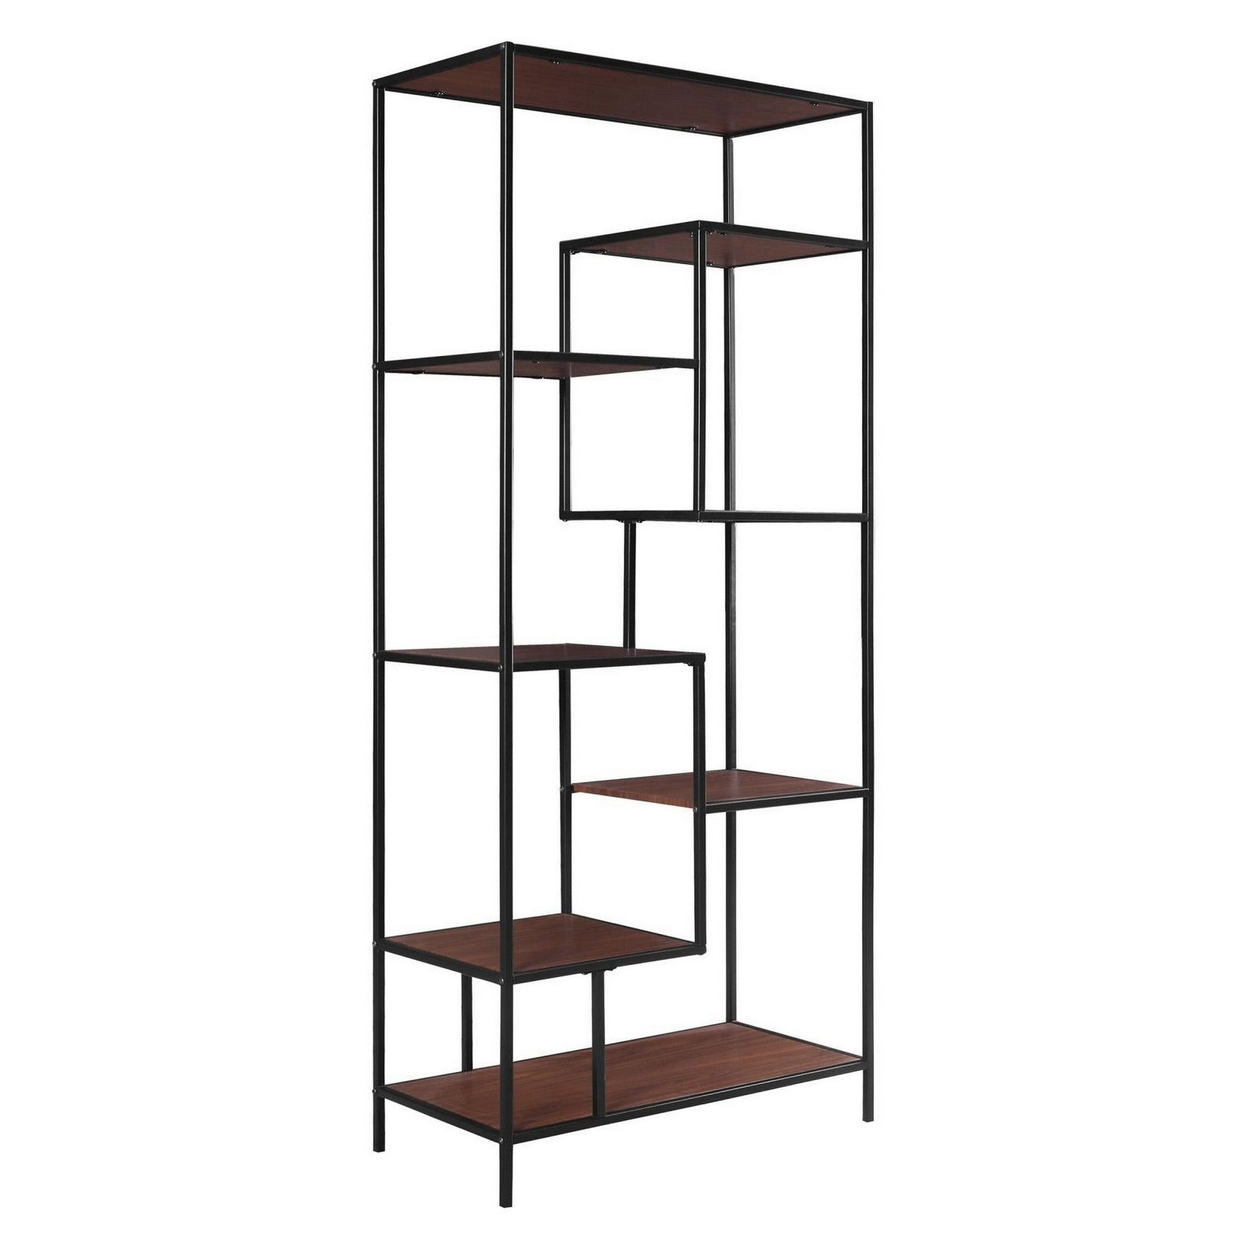 Metal Framed Bookcase With Open Shelves, Black And Brown- Saltoro Sherpi